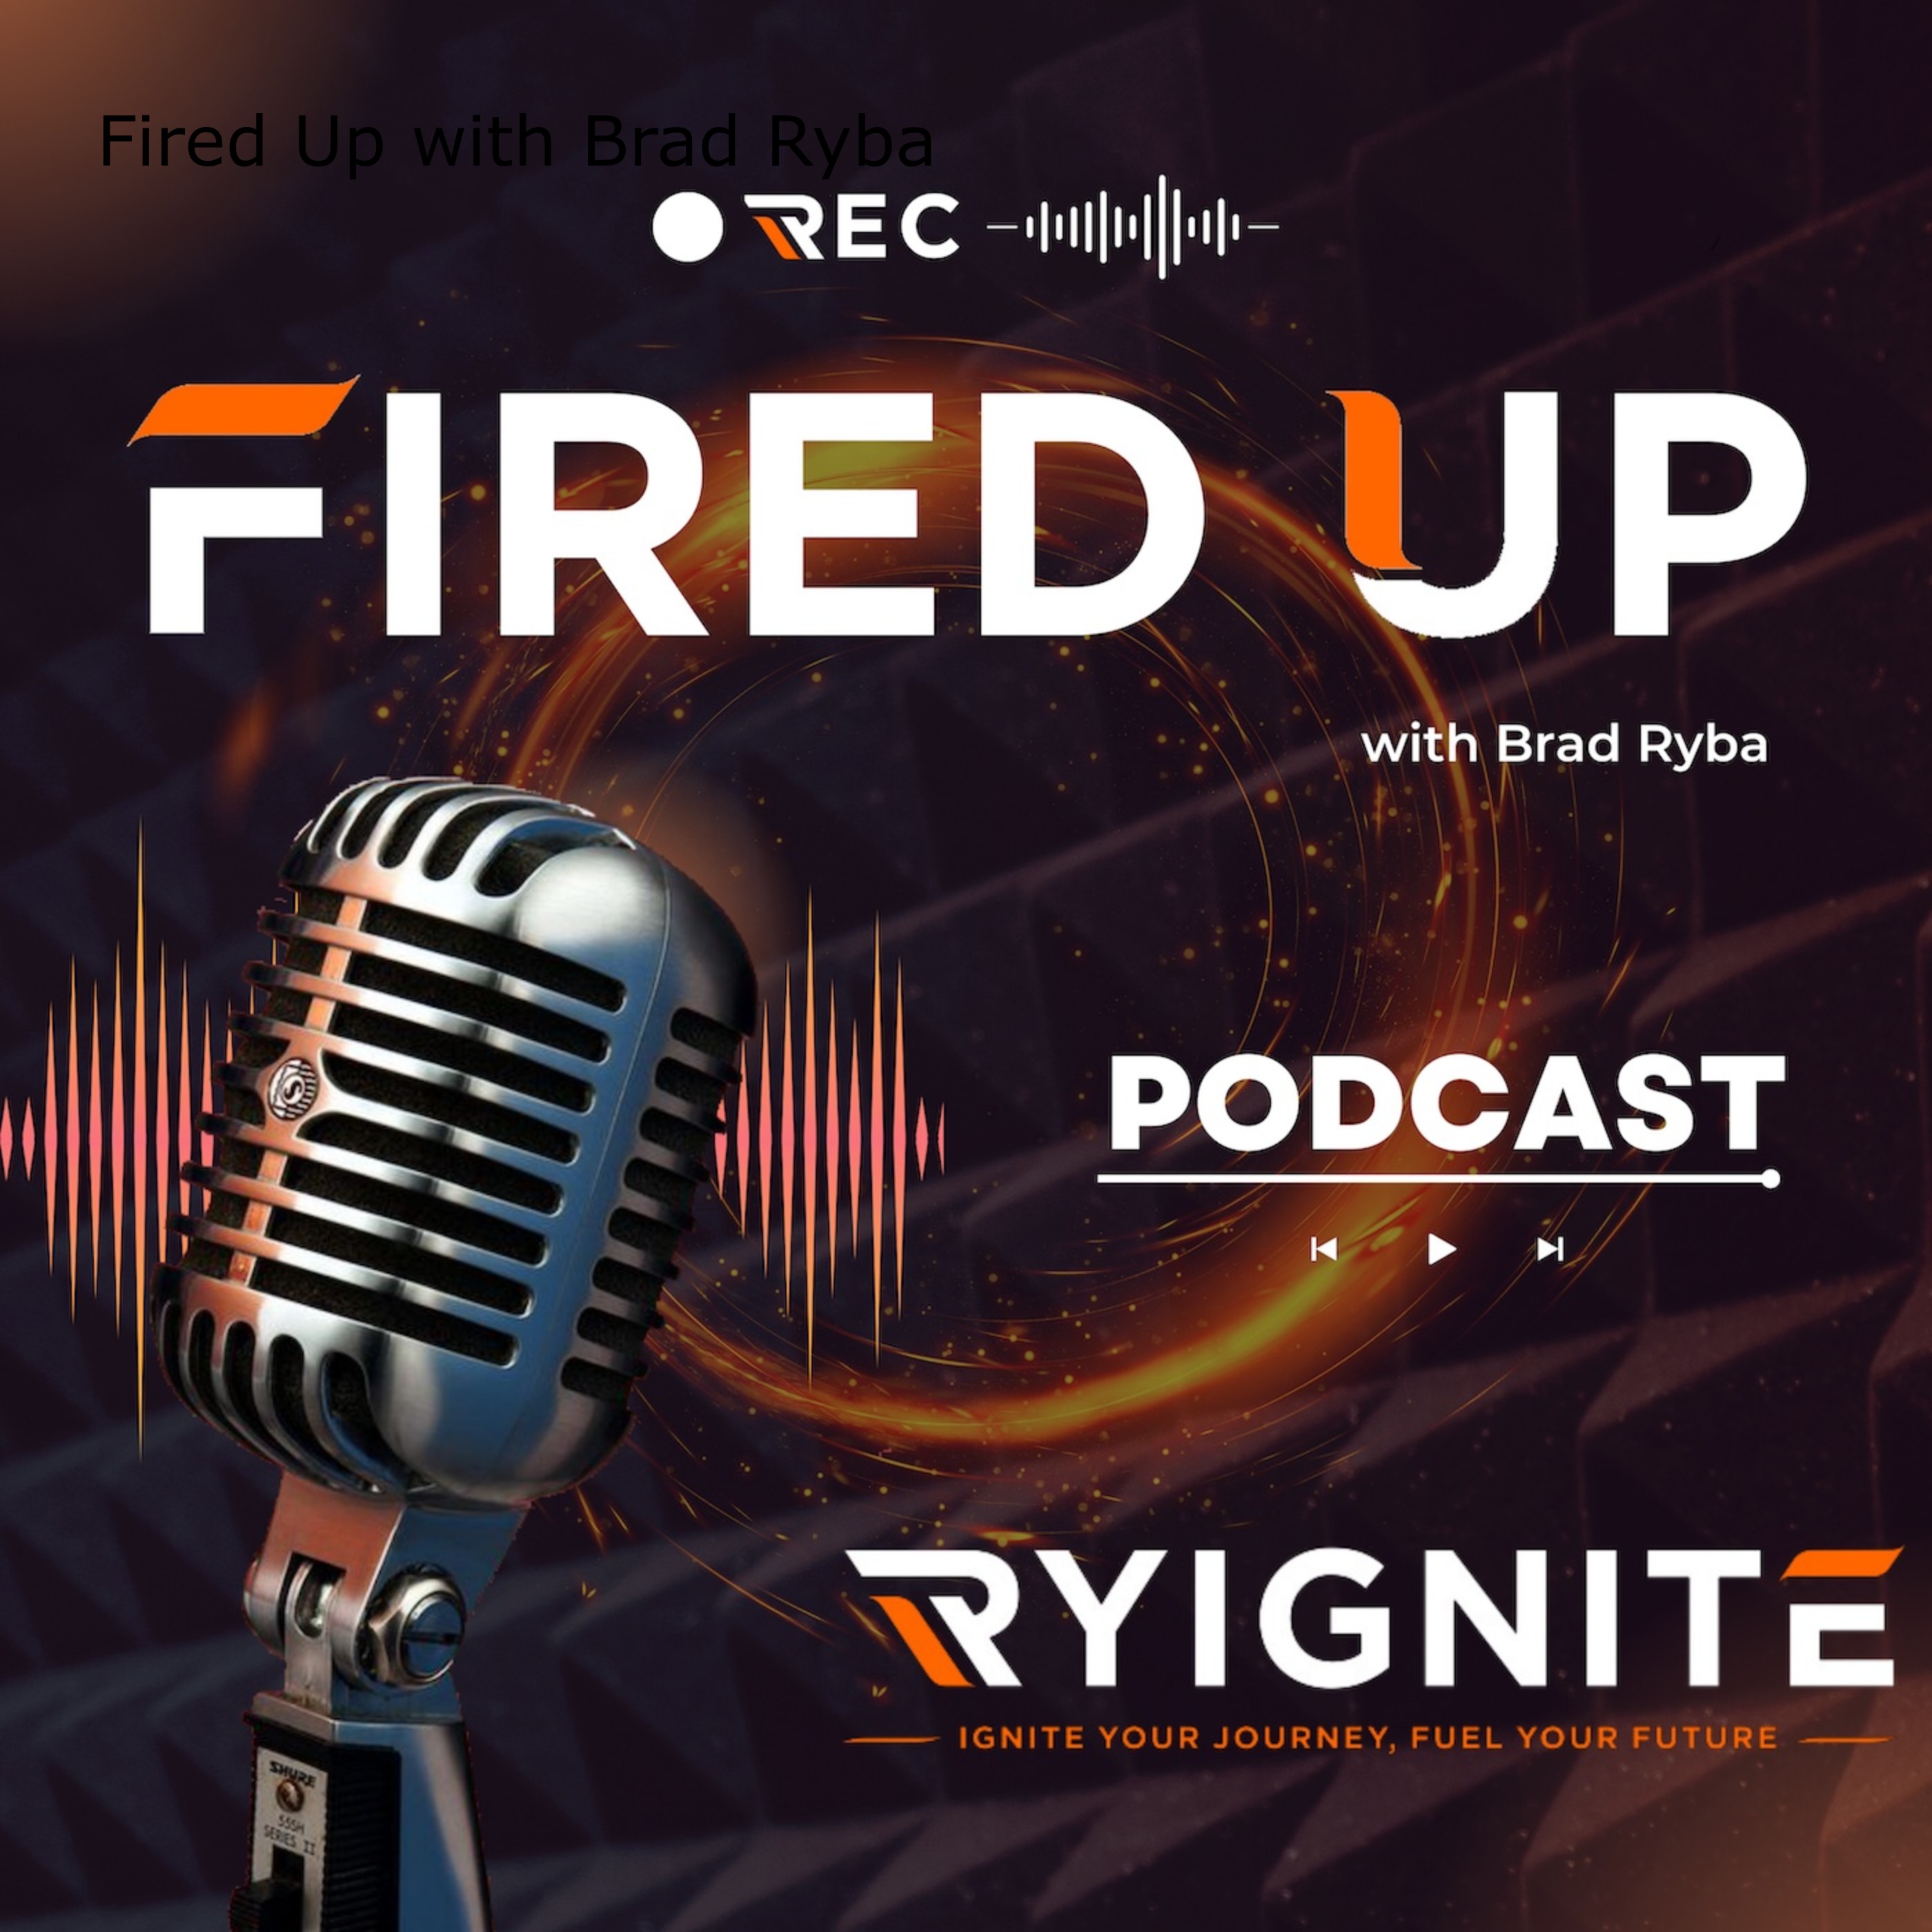 The Fired Up Podcast with Brad Ryba